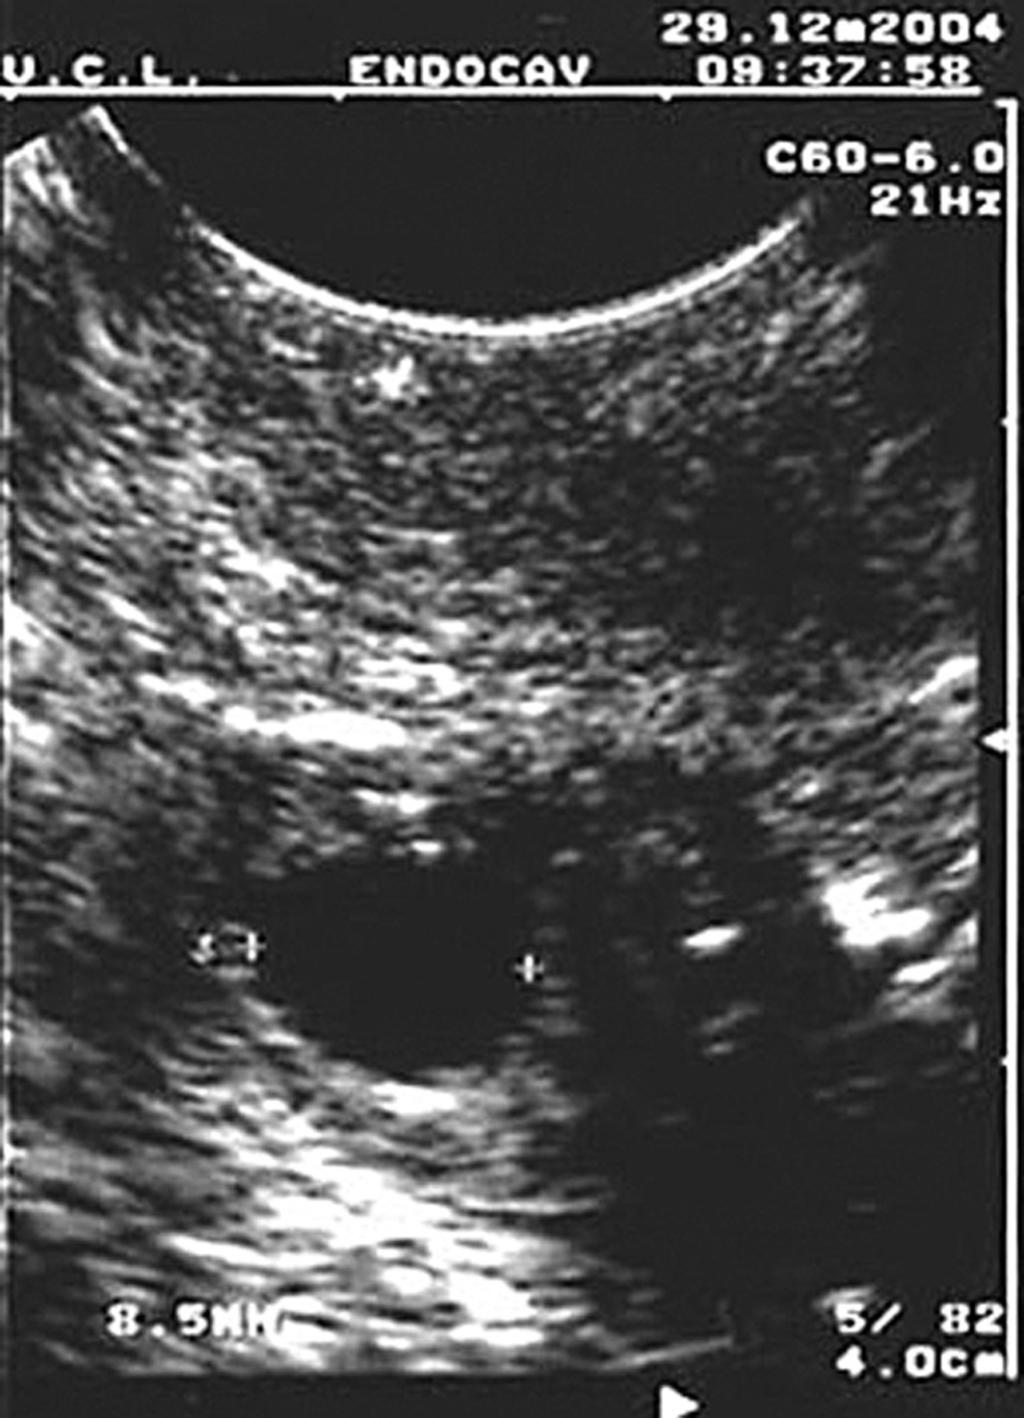 J.Donnez et al. Figure 3. Four-and-a-half months after reimplantation, ultrasonography demonstrated the presence of a follicle of 9.2 mm in size, which reached 14 mm 3 days before the LH peak.